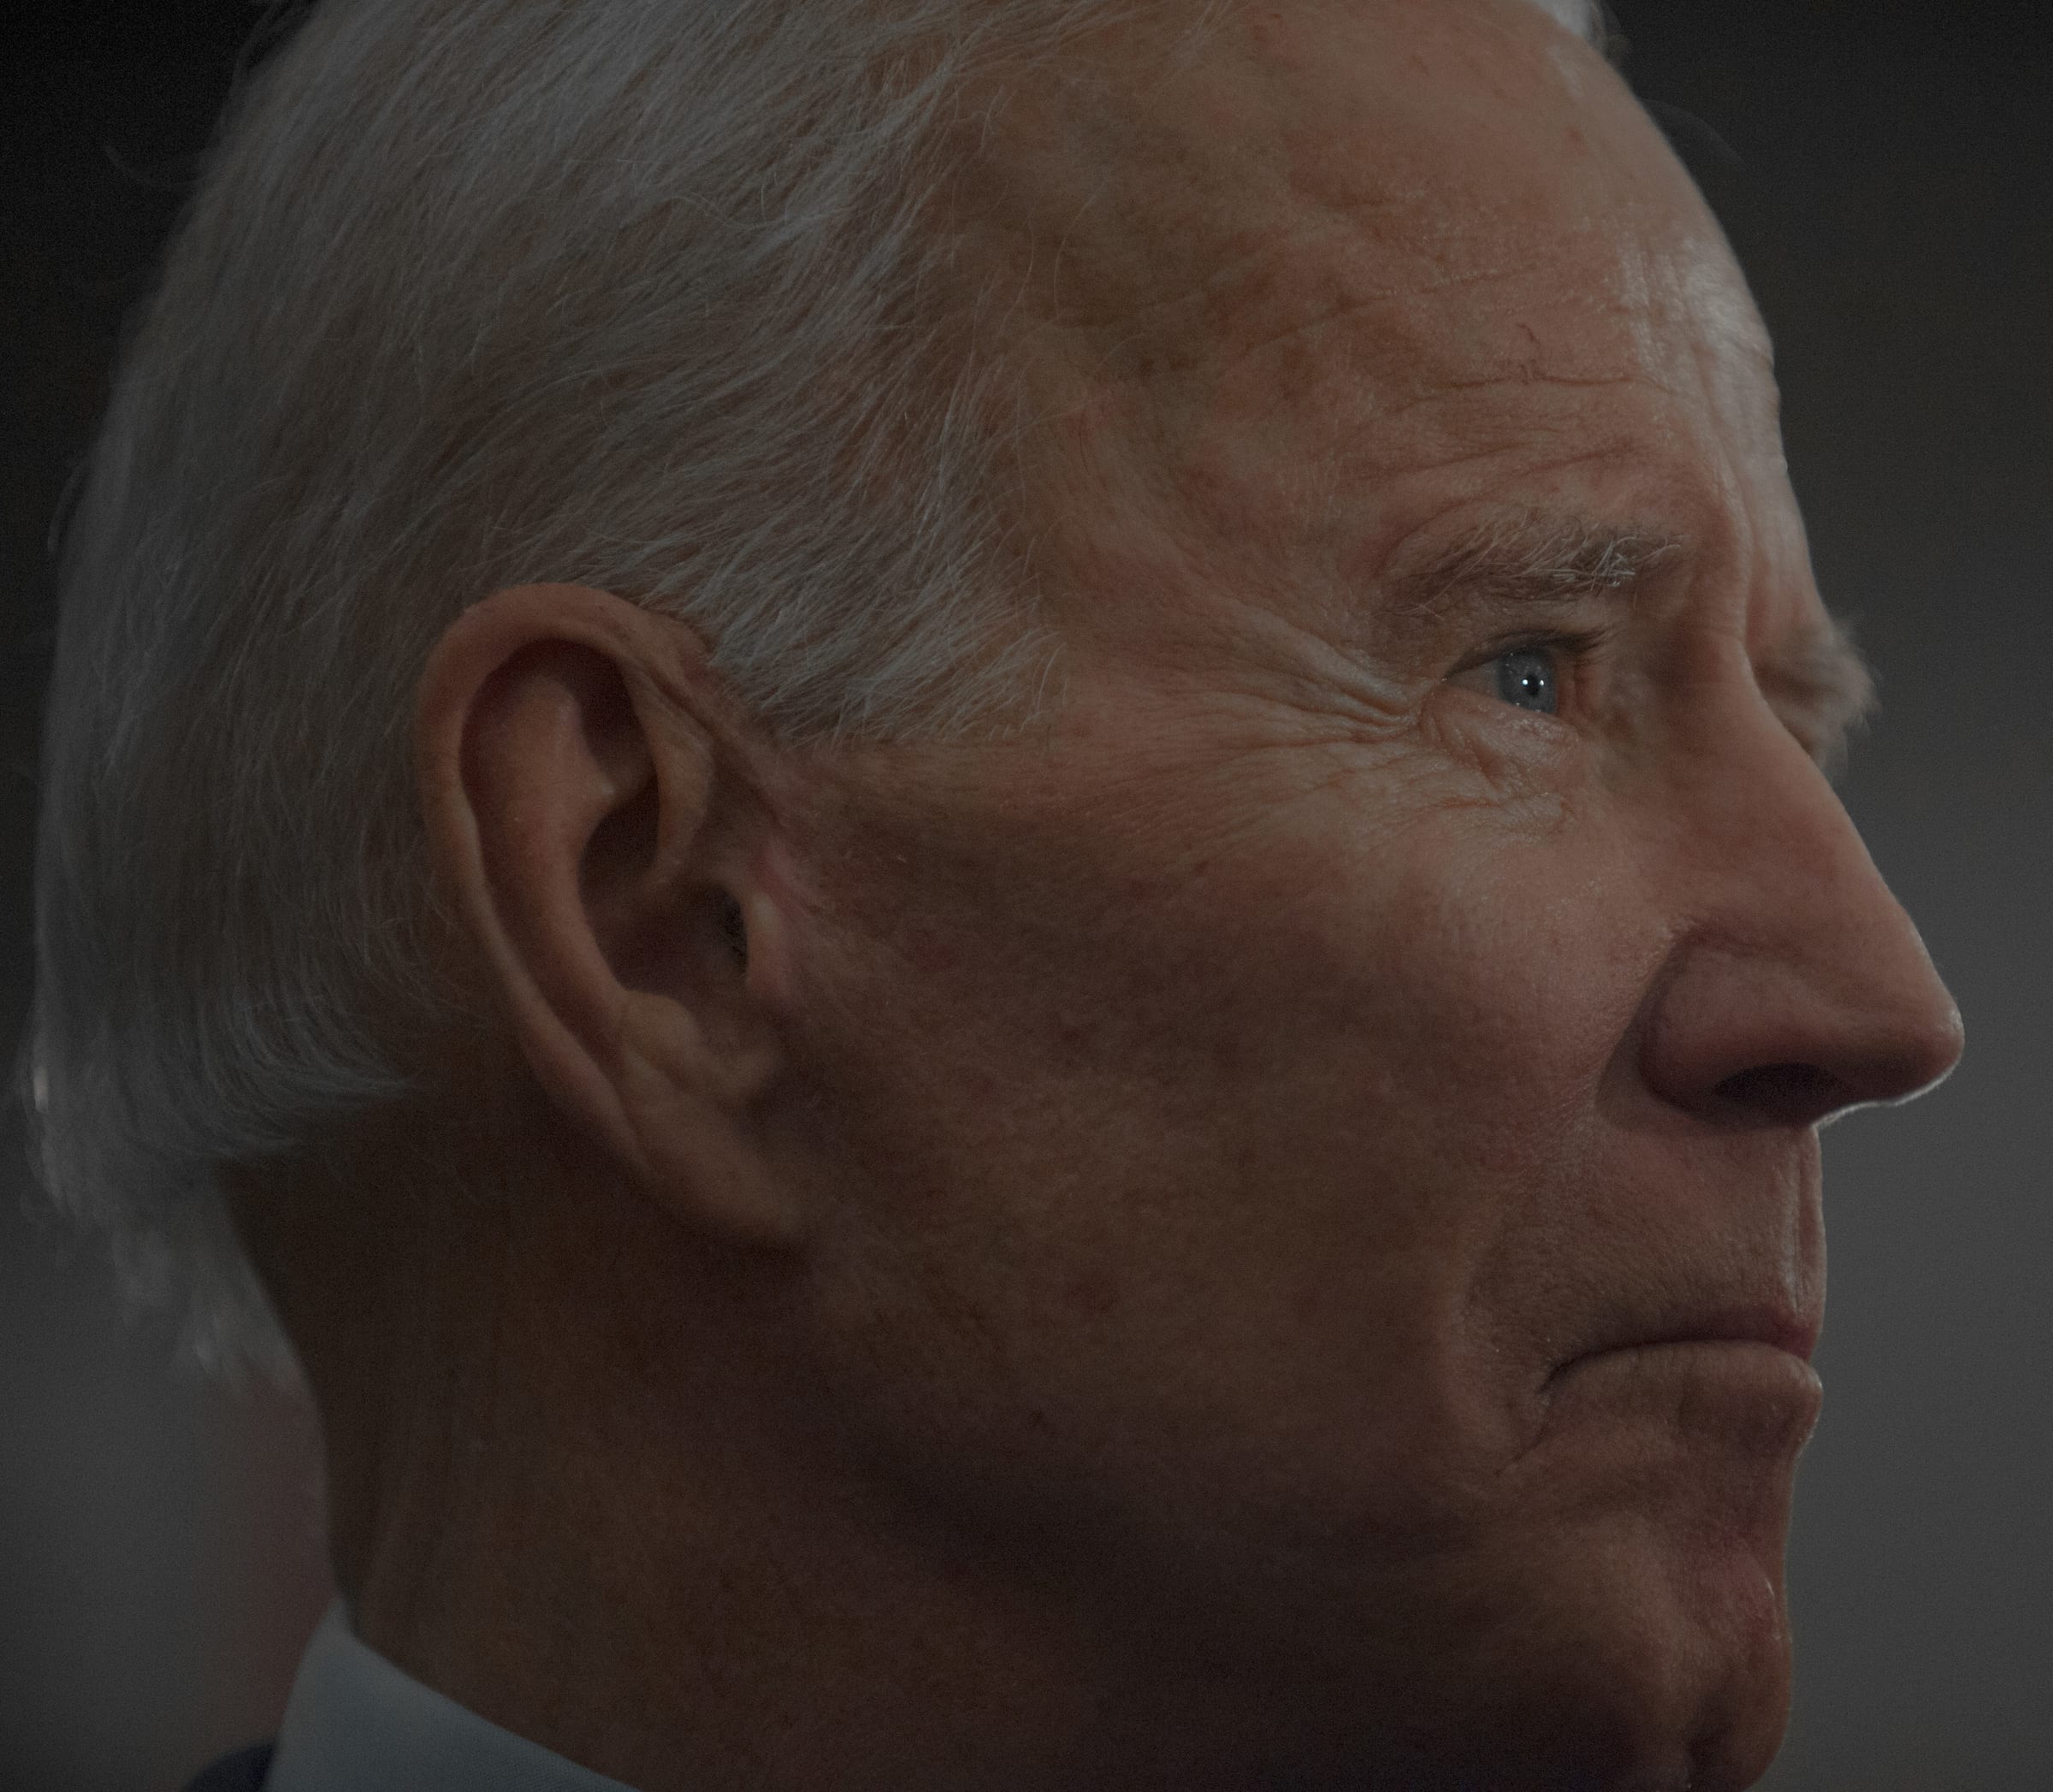 Joe Biden, presidential candidate and former Vice President, speaks to his supporters in Fort Dodge, Iowa, on Jan. 21.